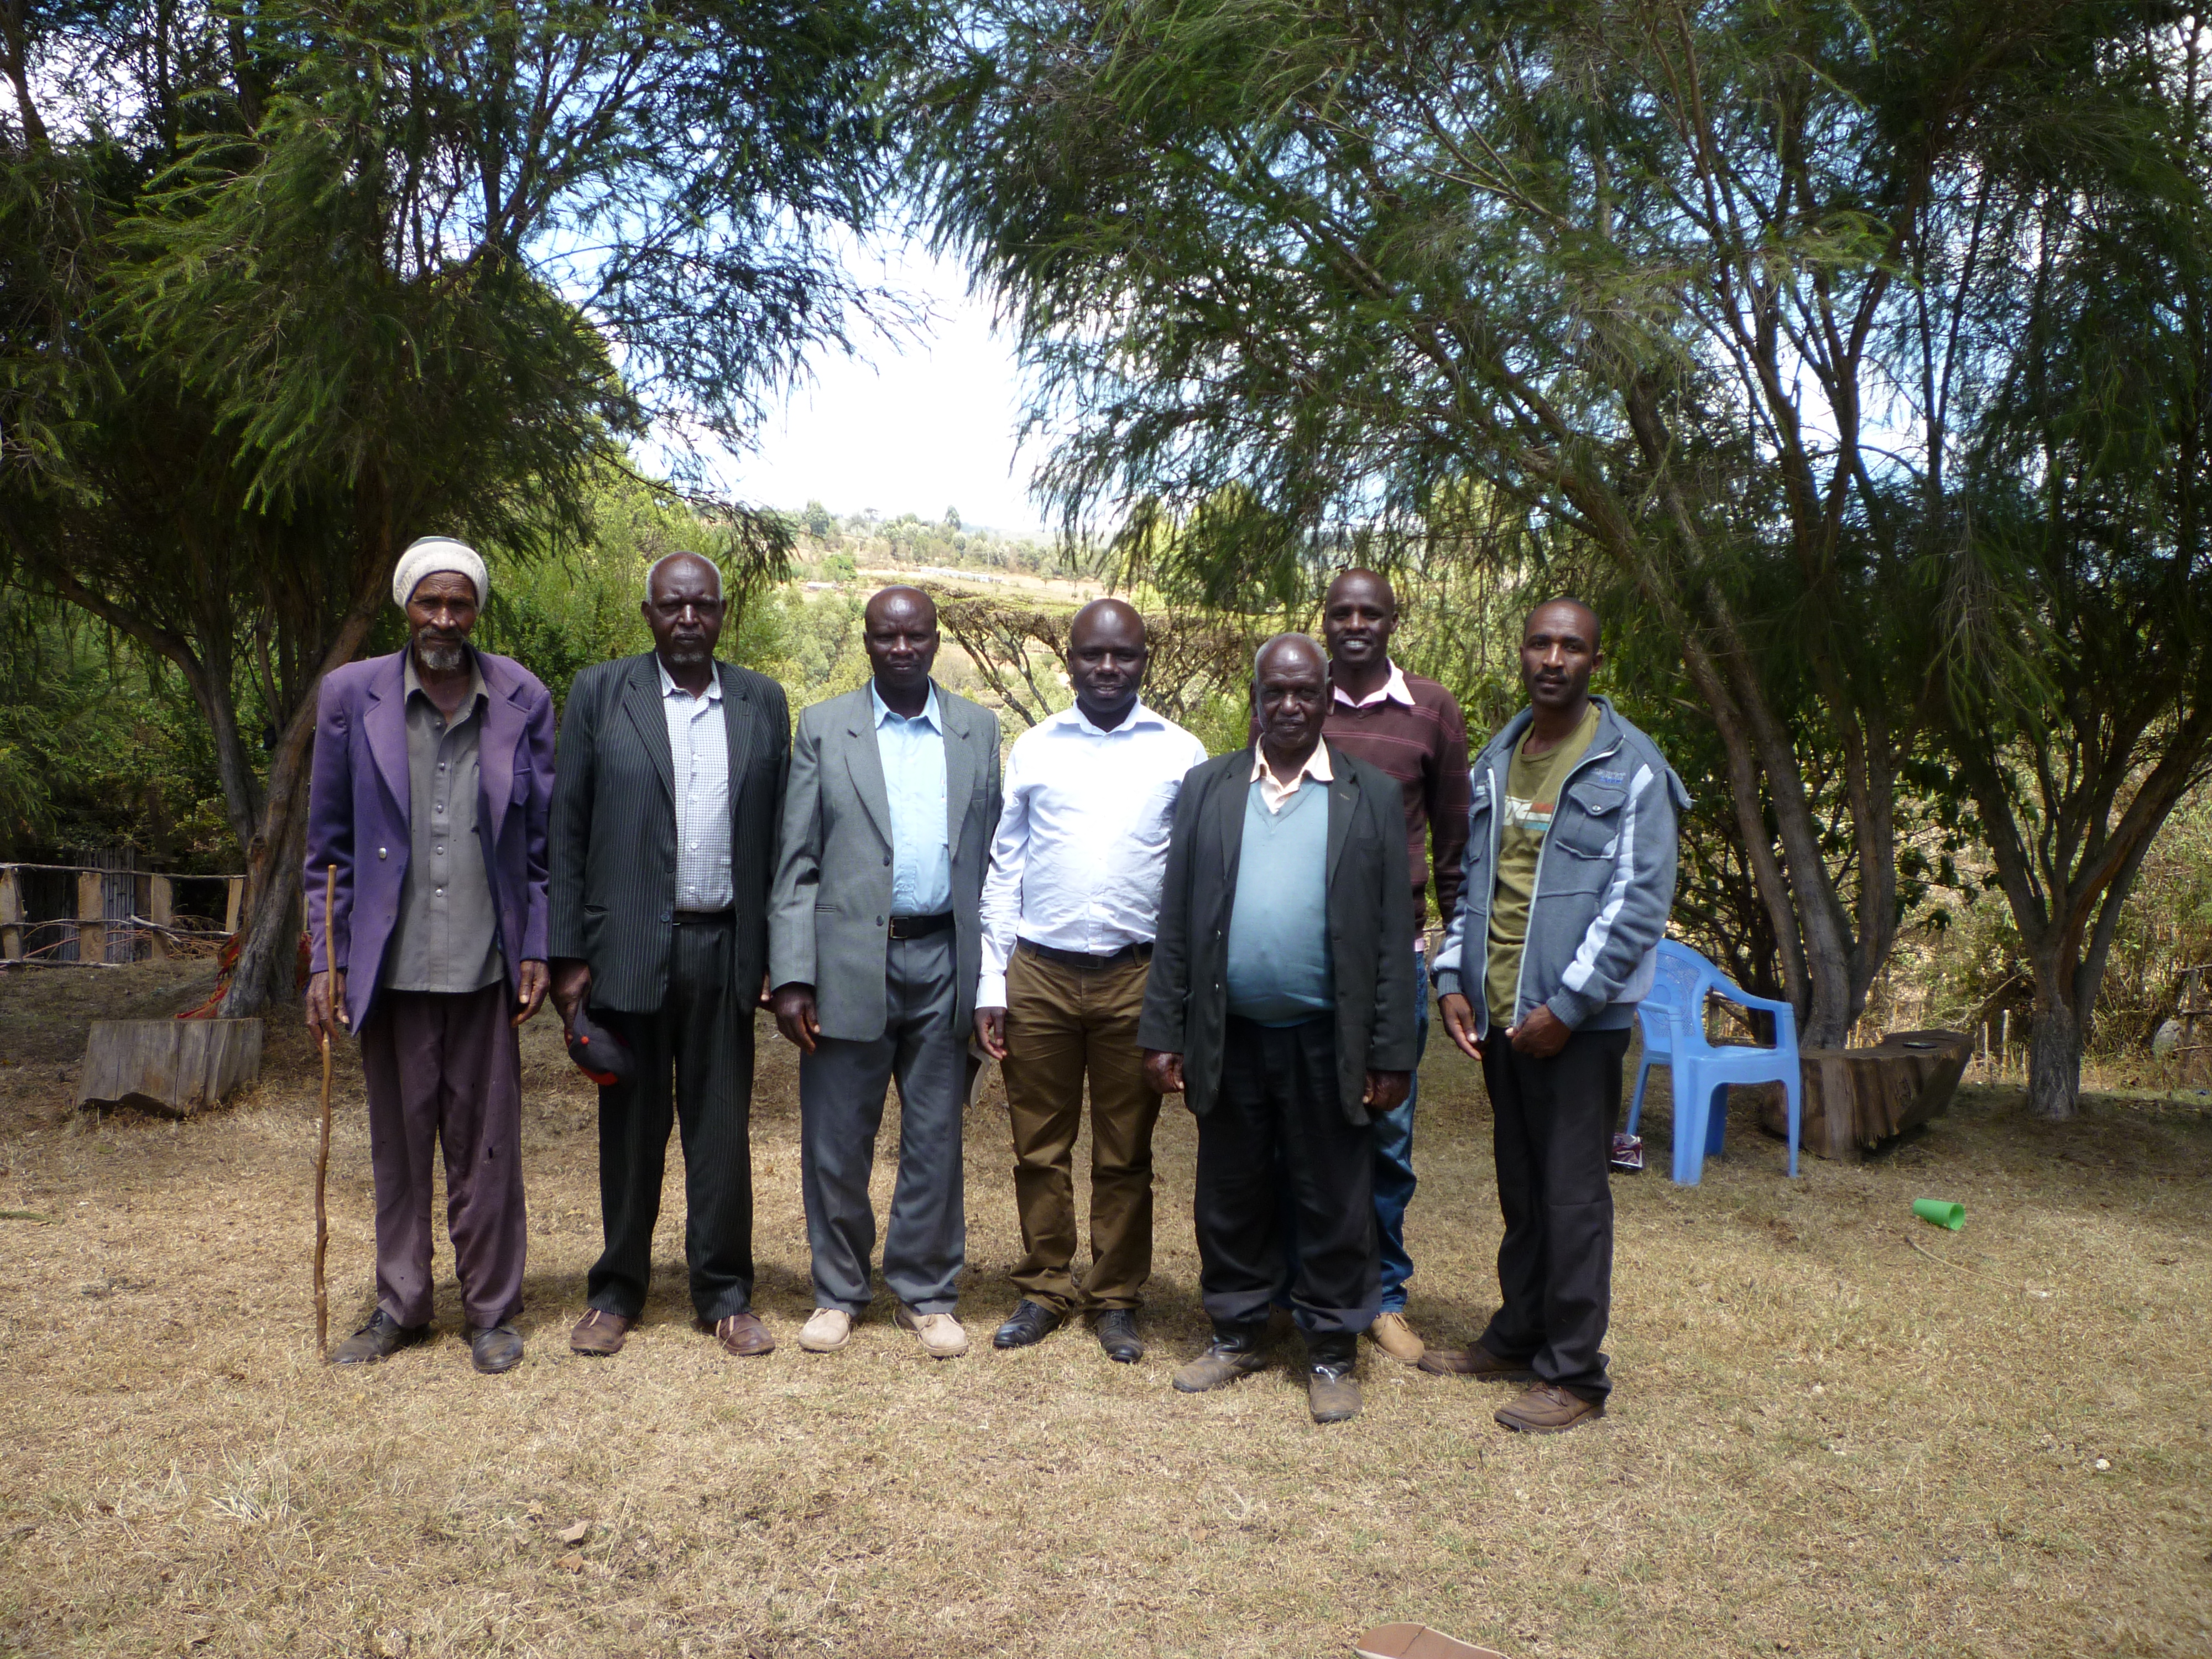 Kipsigis community Chief and Elders standing with Research Assistant David Ngira Otieno (centre)